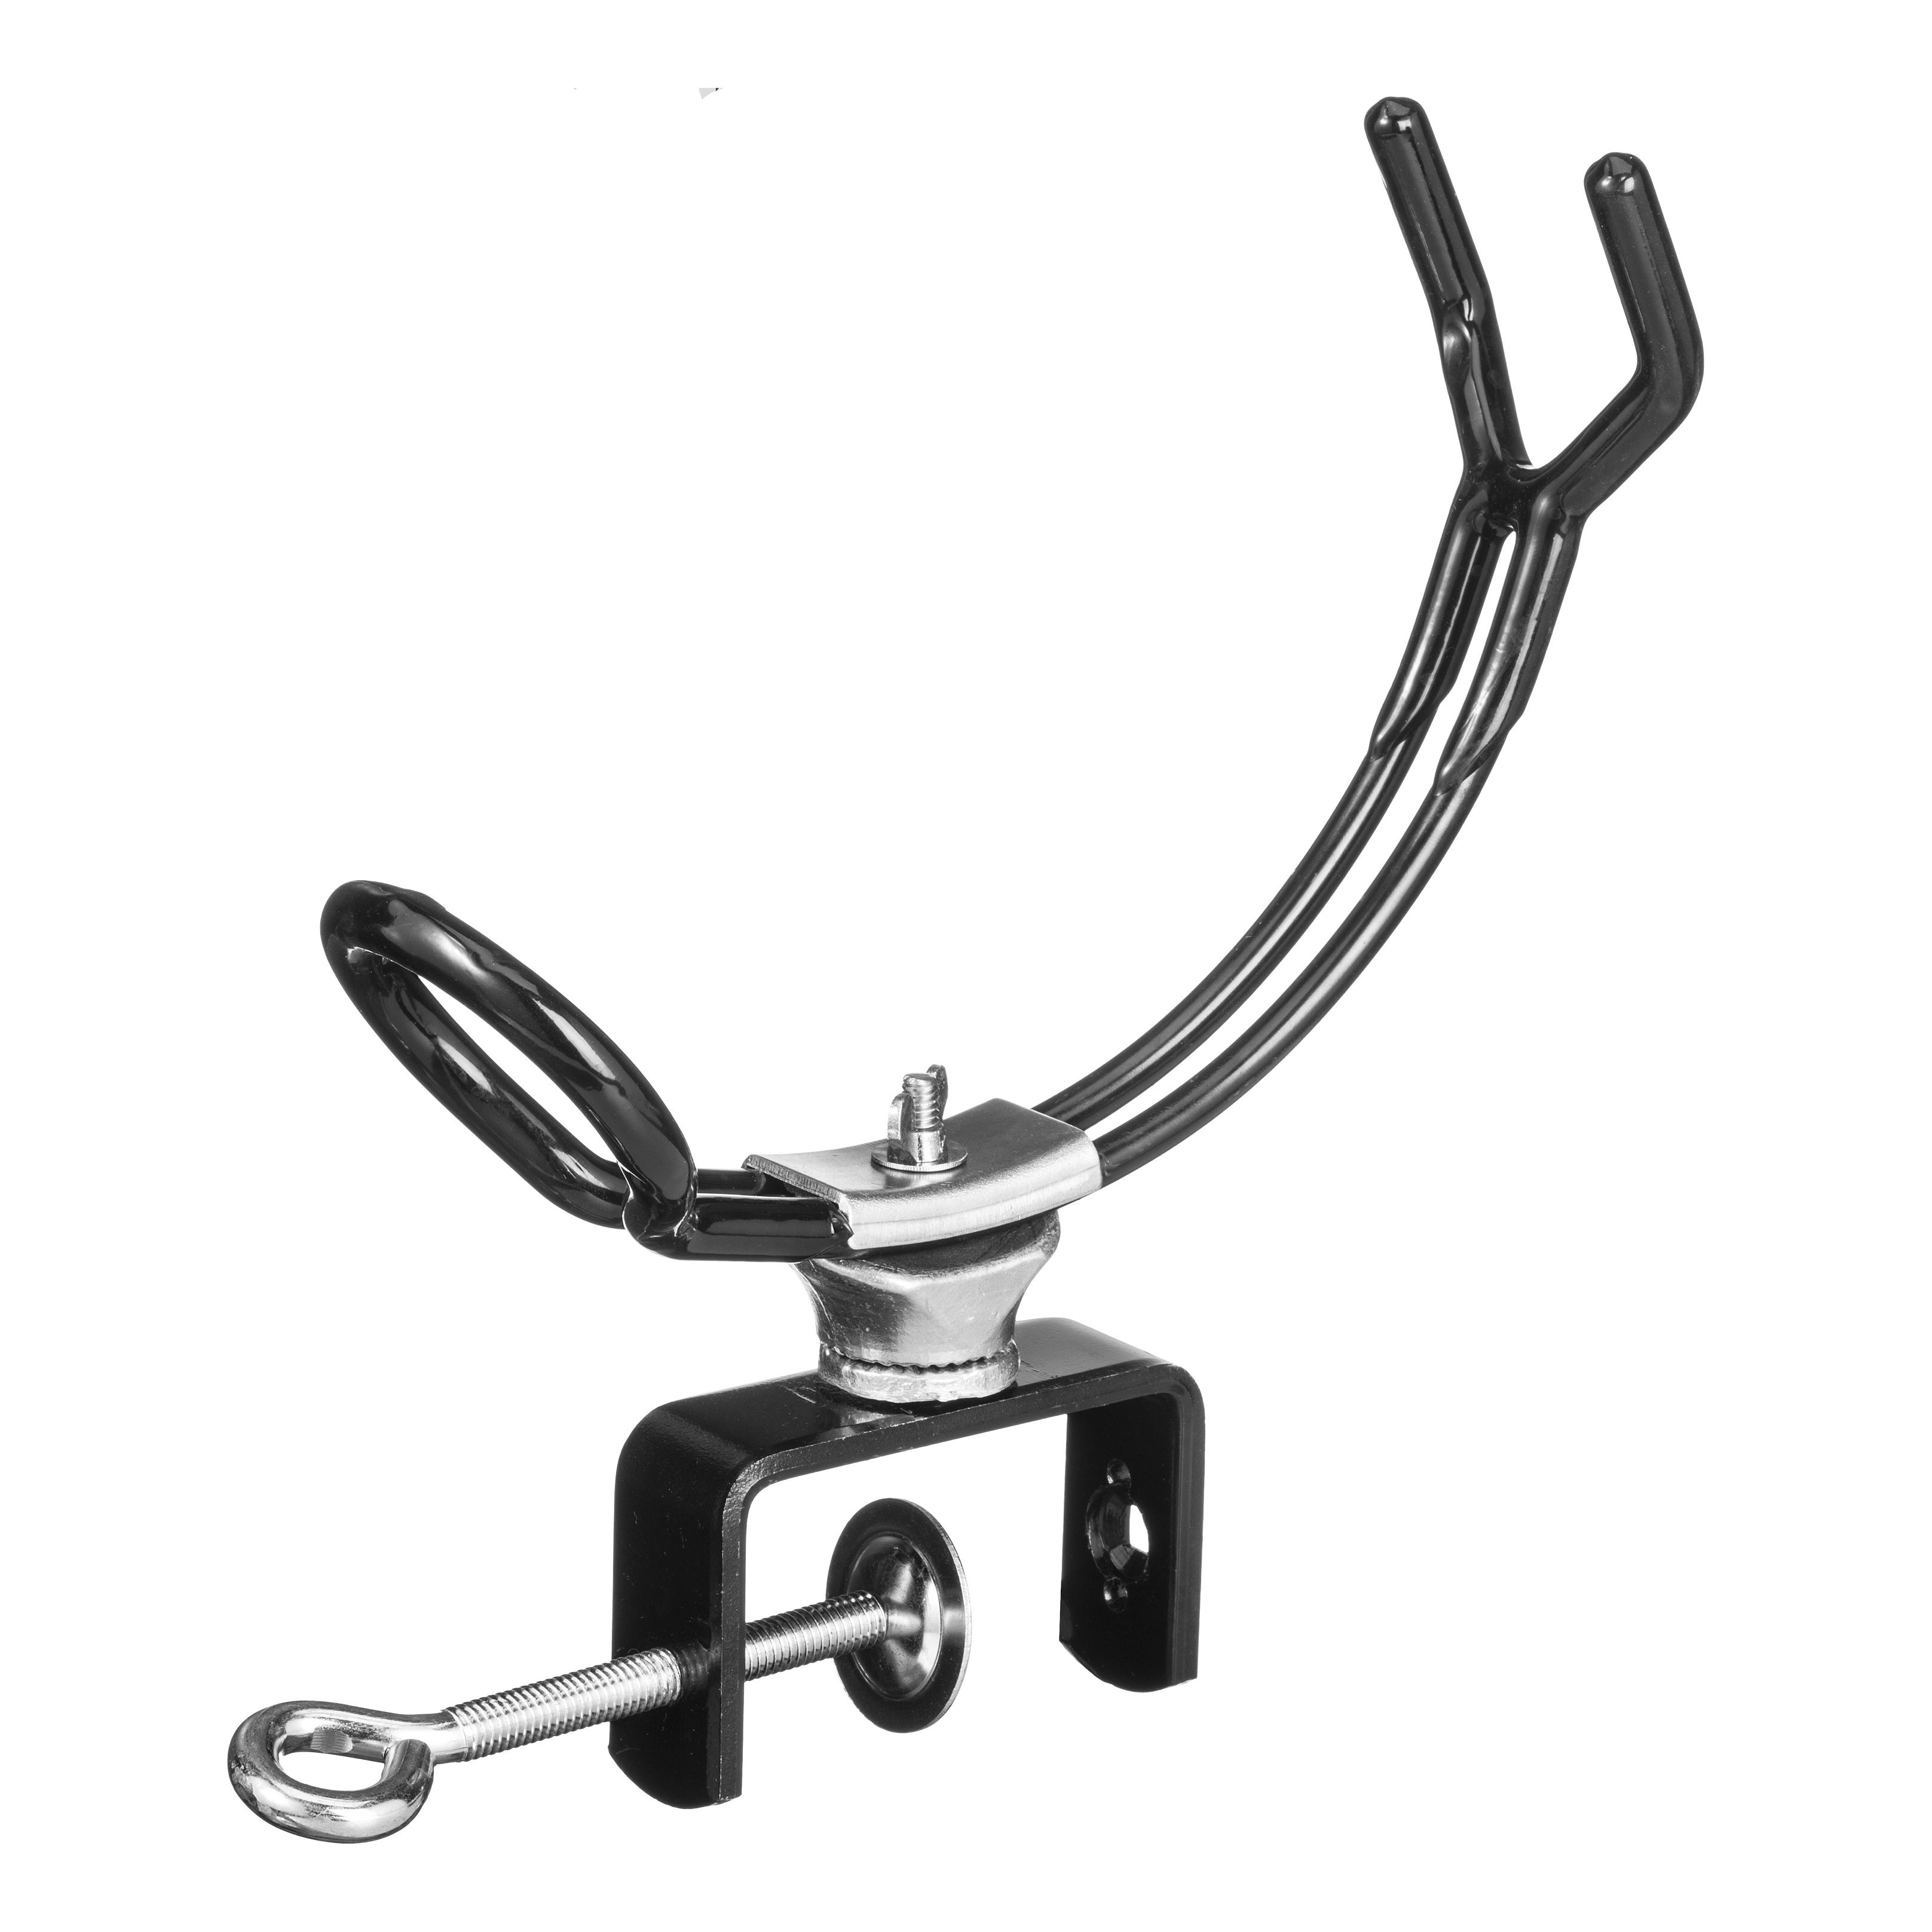 NEW Heavy Duty Fishing Pole Rod Holder with Universal Clamp-On